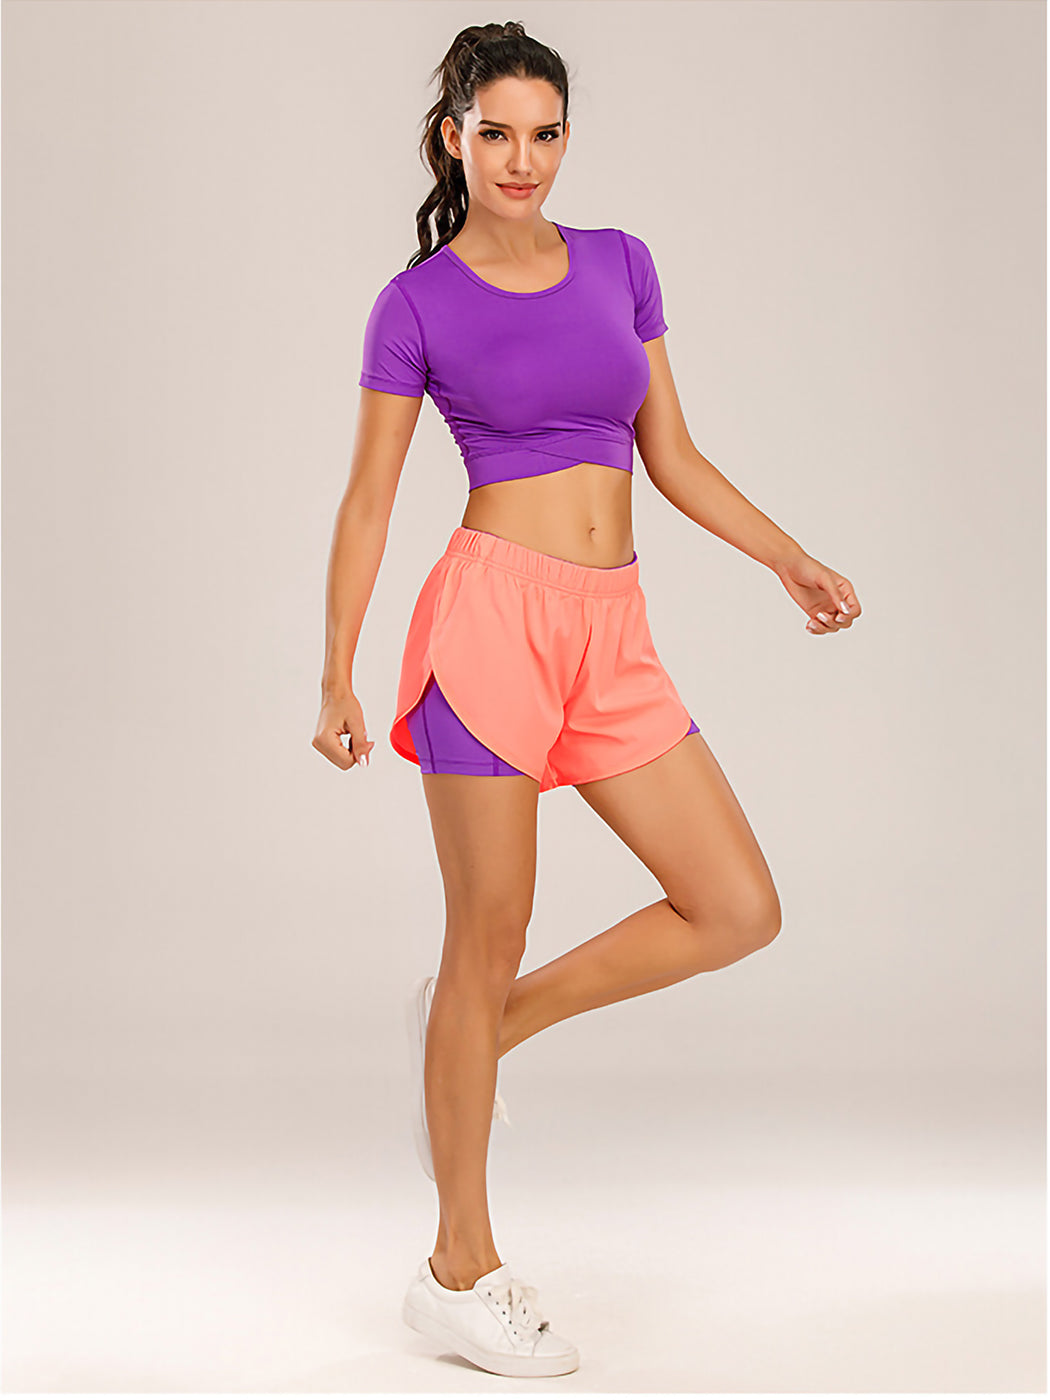 Sport Running Shorts 2 in 1 with Pockets